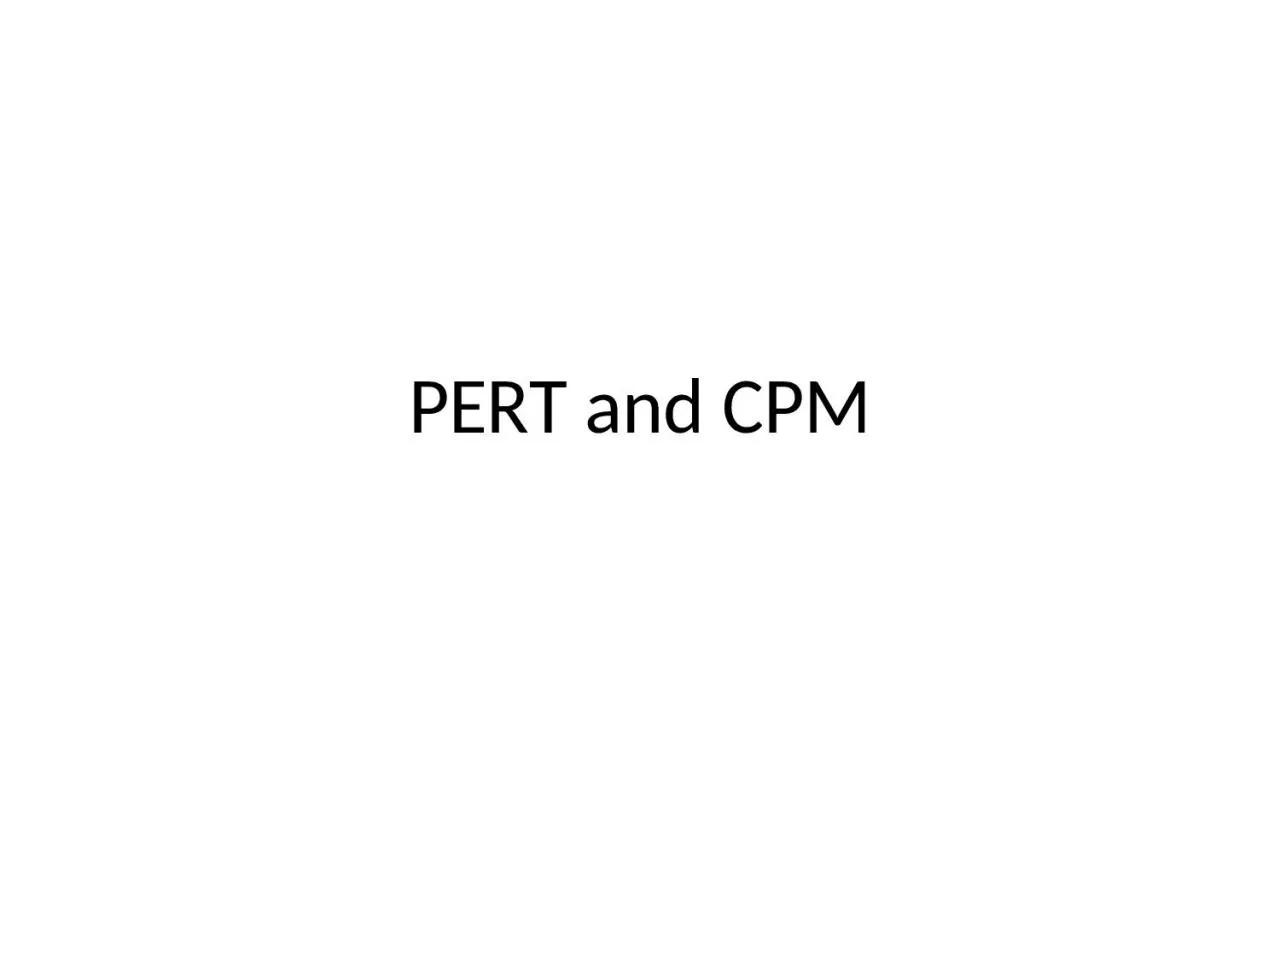 PERT and CPM Introduction